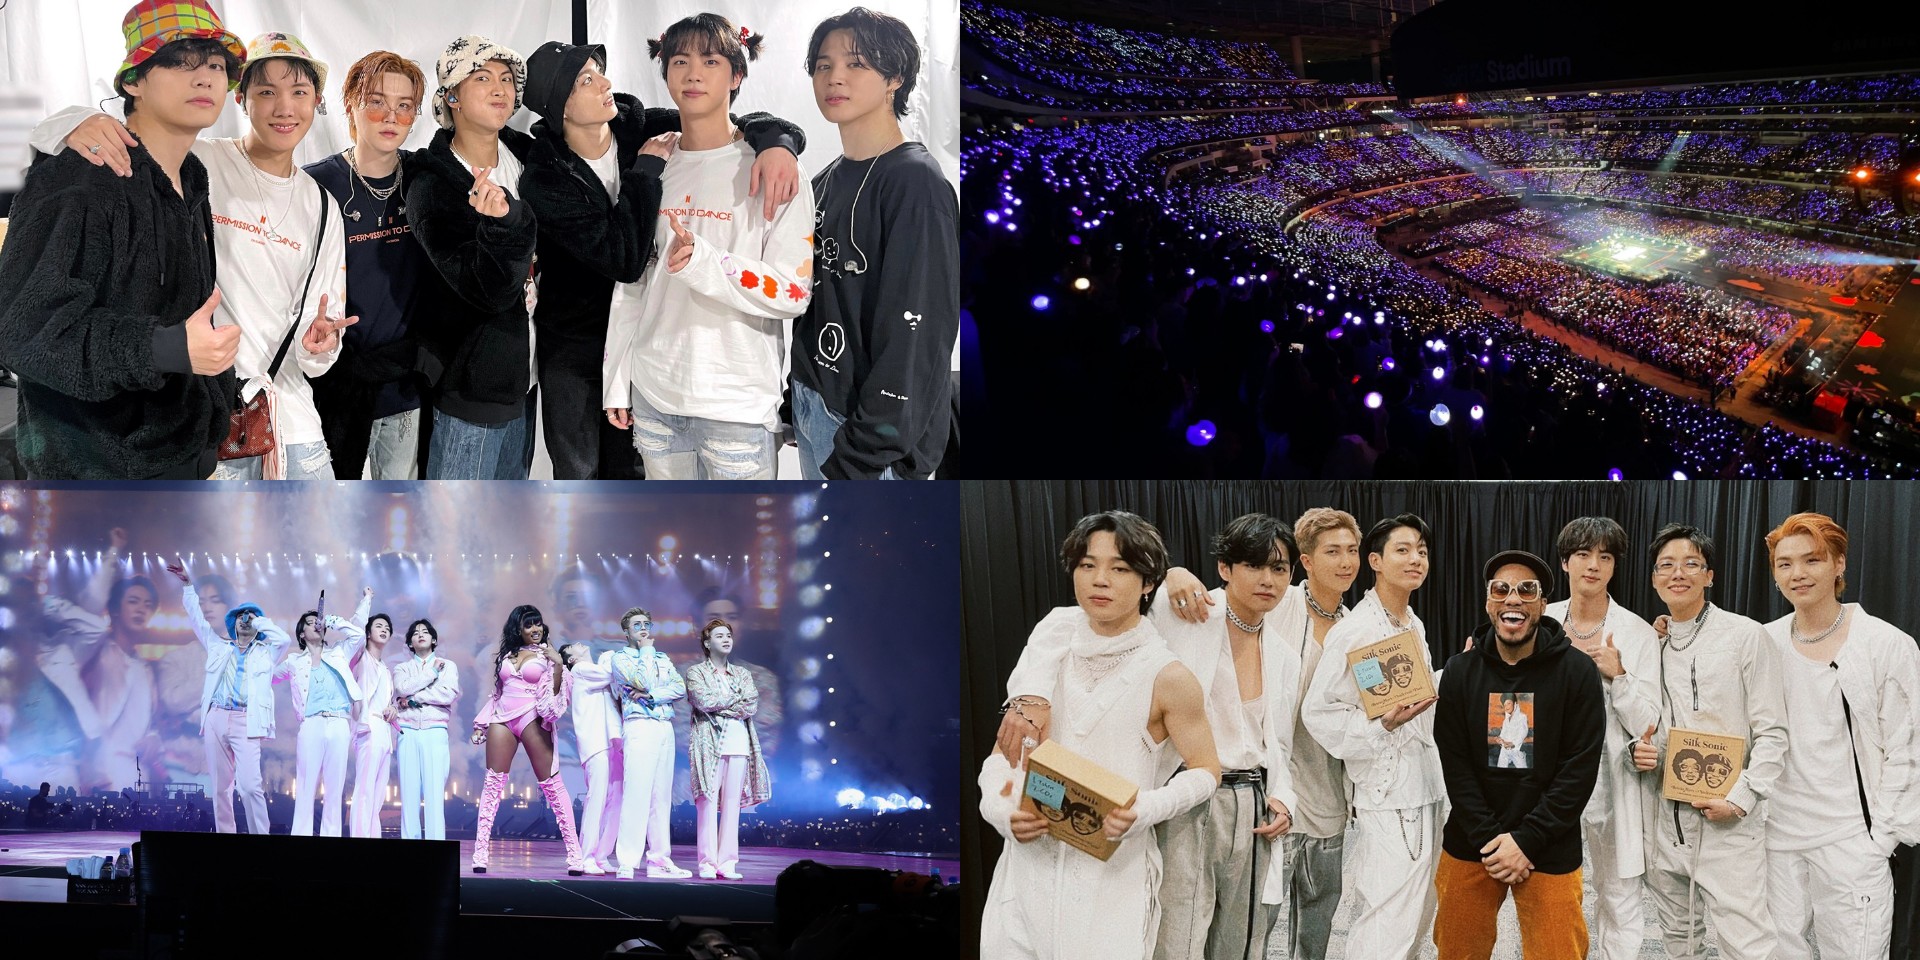 Here's what went down at the biggest reunion of the year: BTS and ARMY at the PERMISSION TO DANCE ON STAGE concert in LA